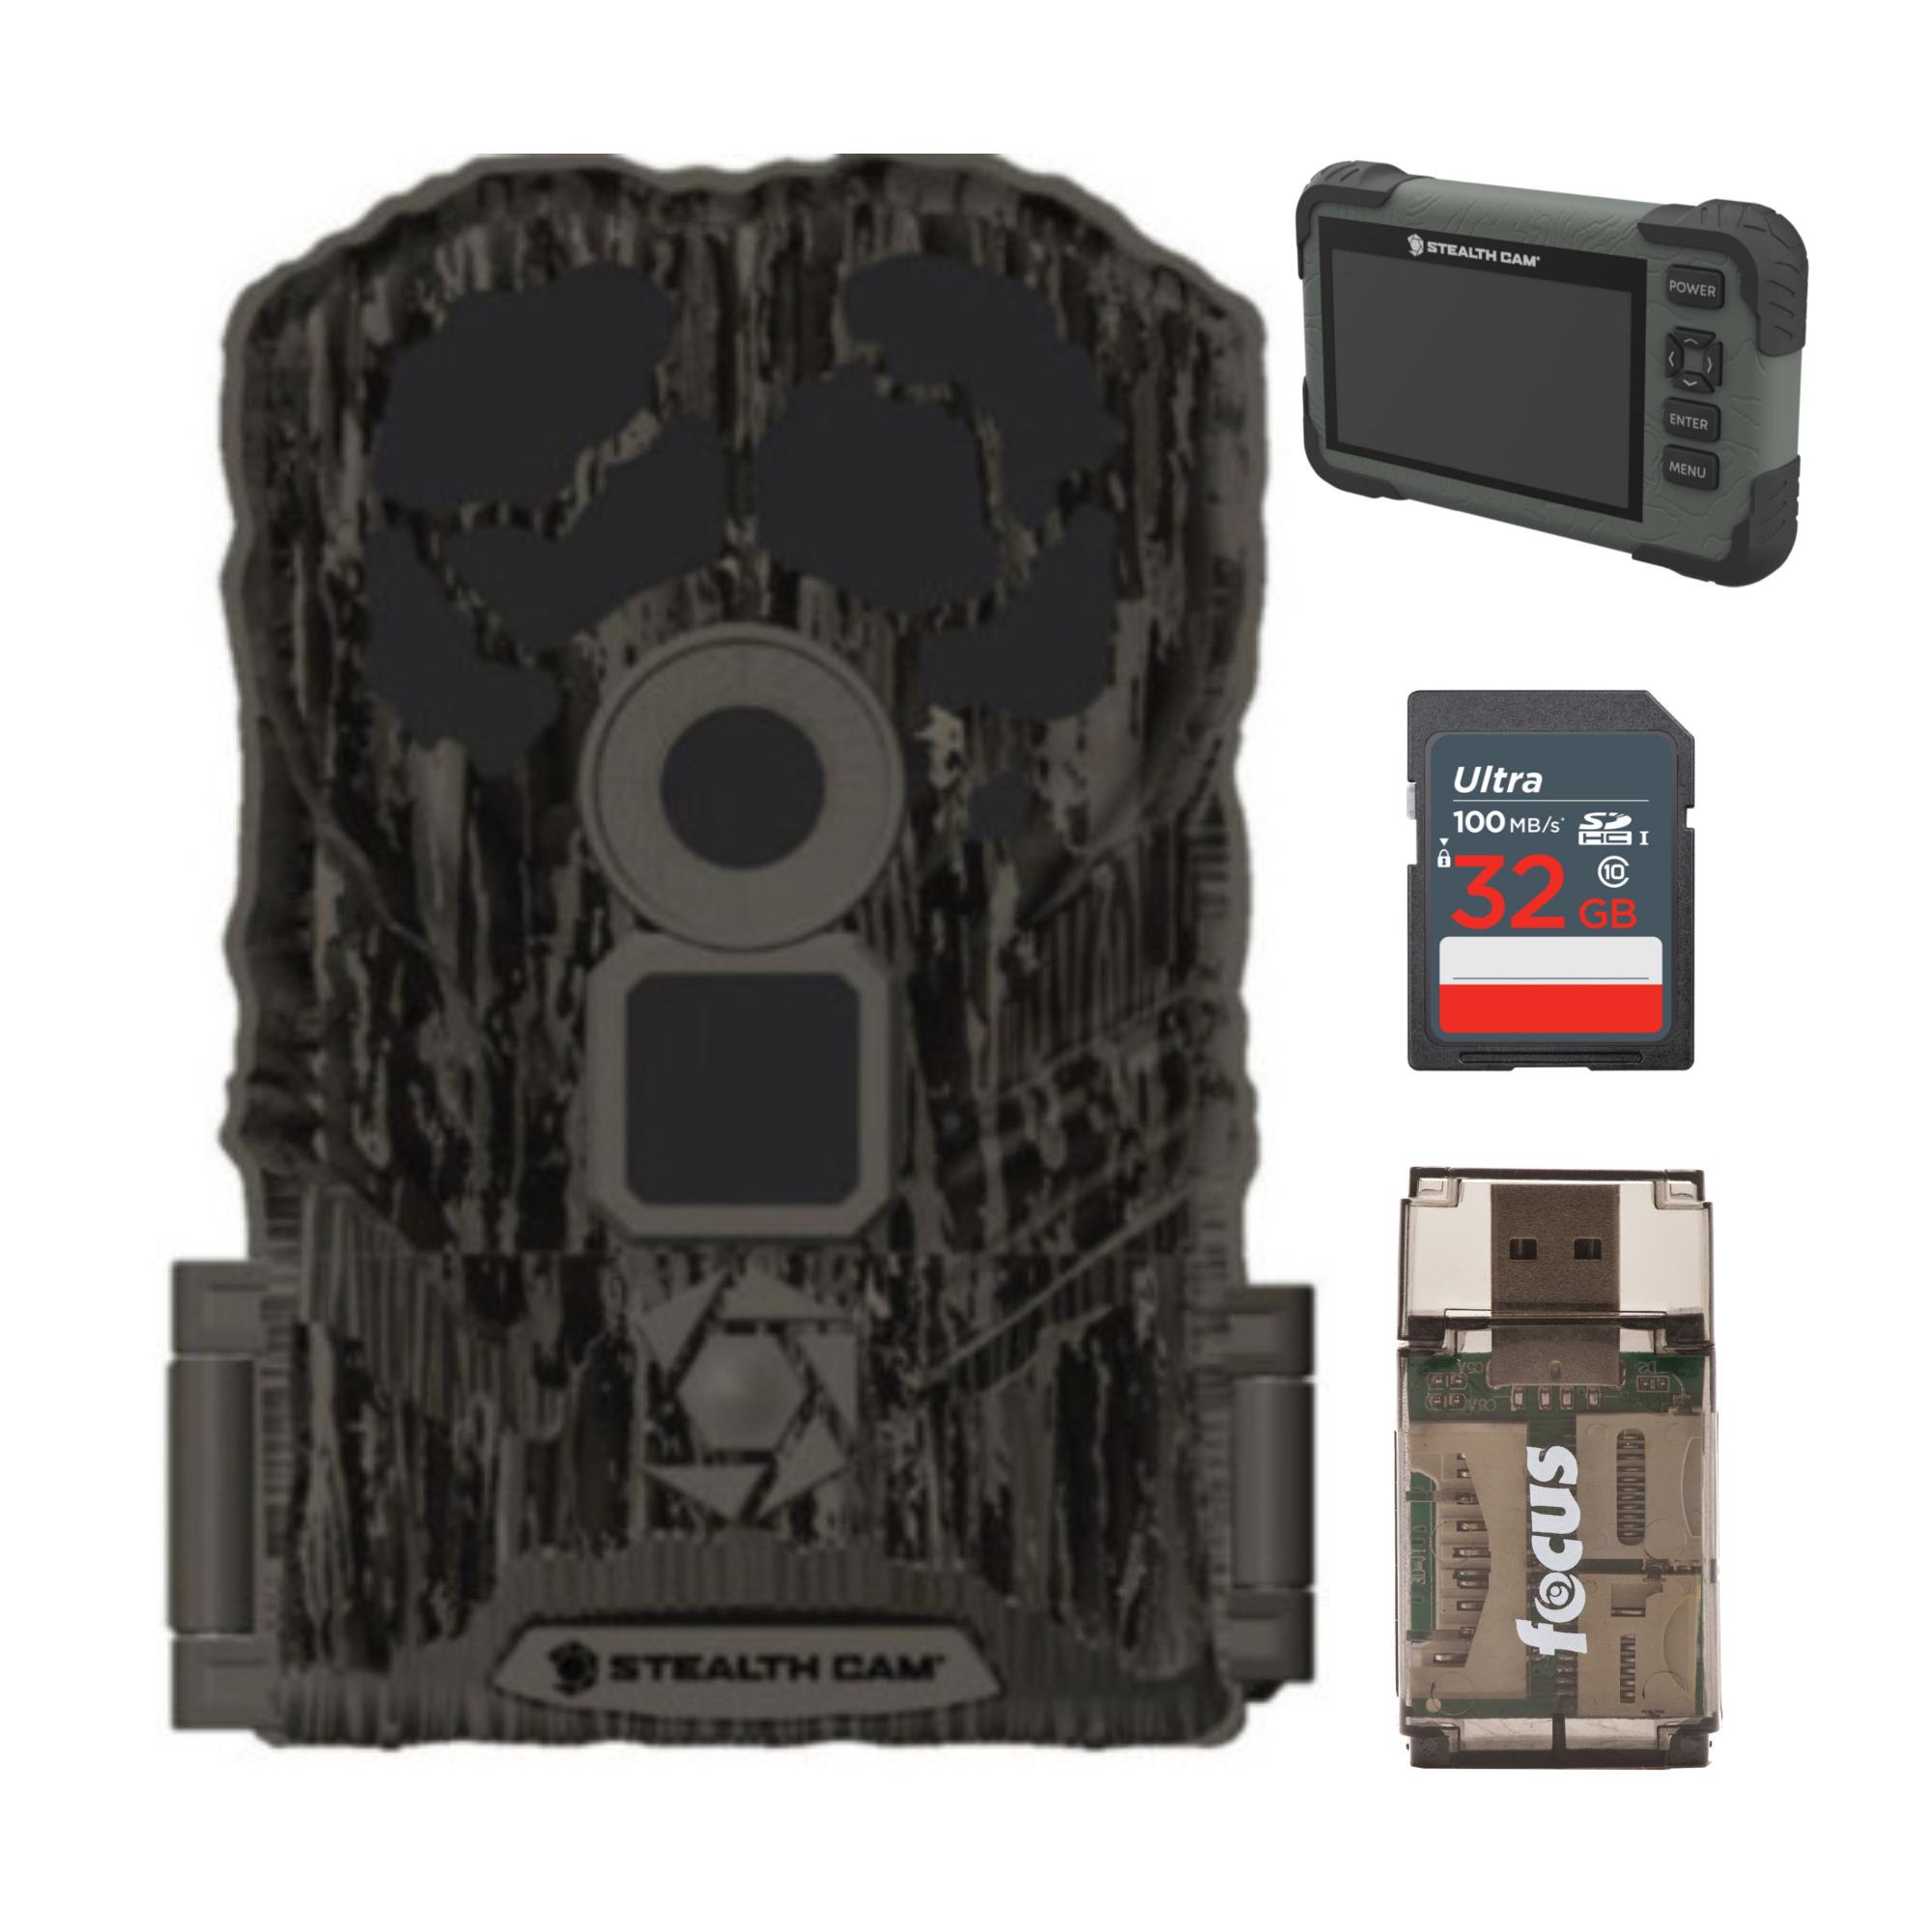 Stealth Cam Browtine 14MP Trail Camera with Video with Reader-Viewer, Memory Card & Card Reader - image 1 of 5